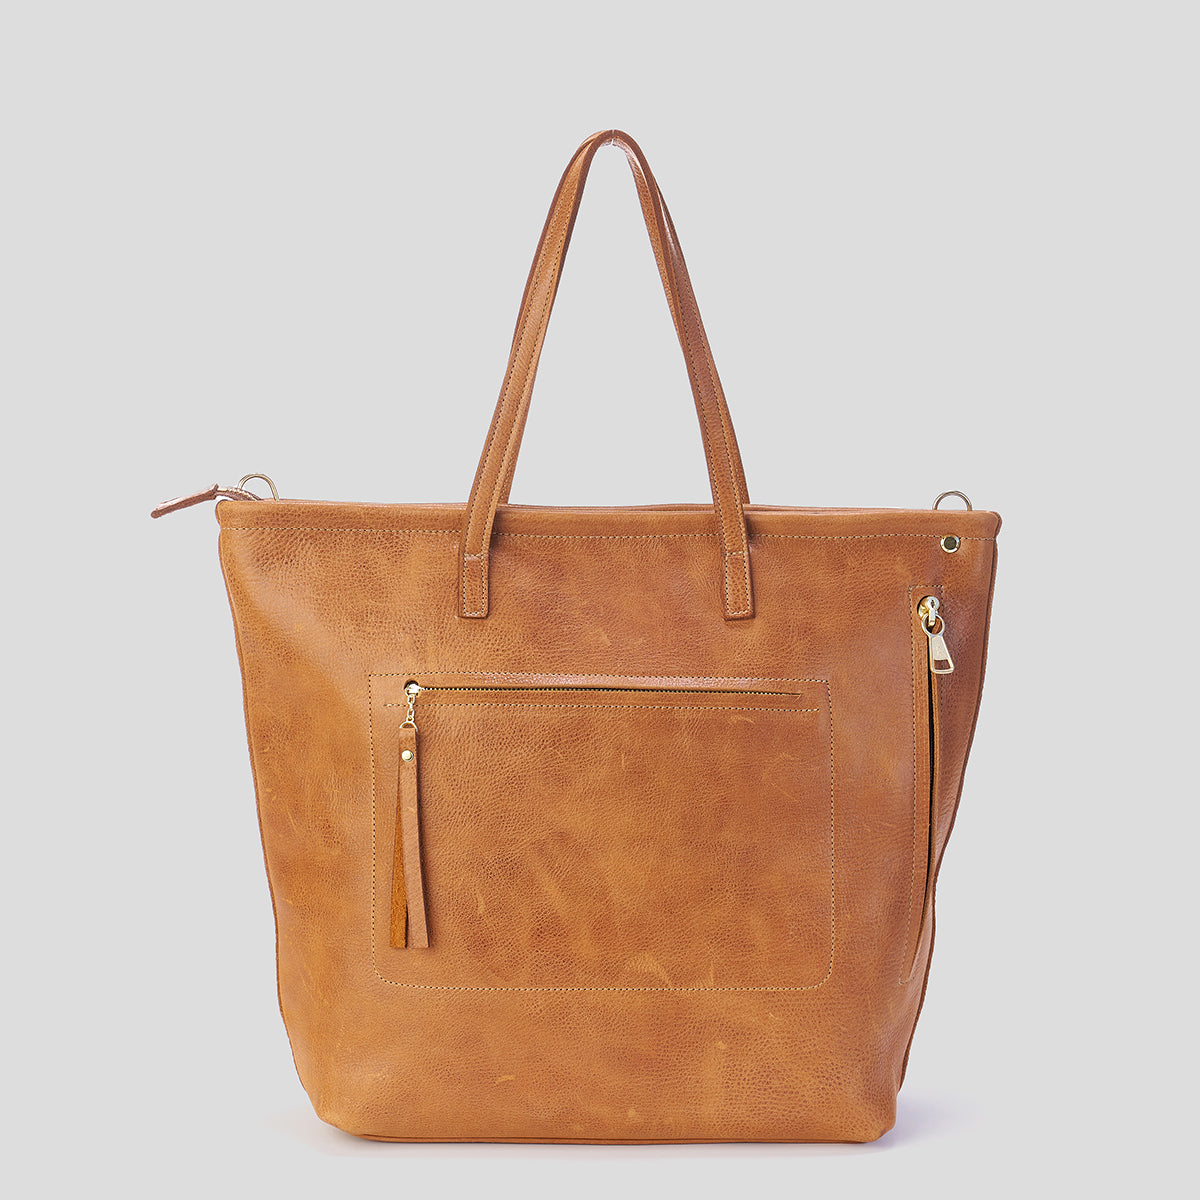 SIENNA TOTE #21 | New